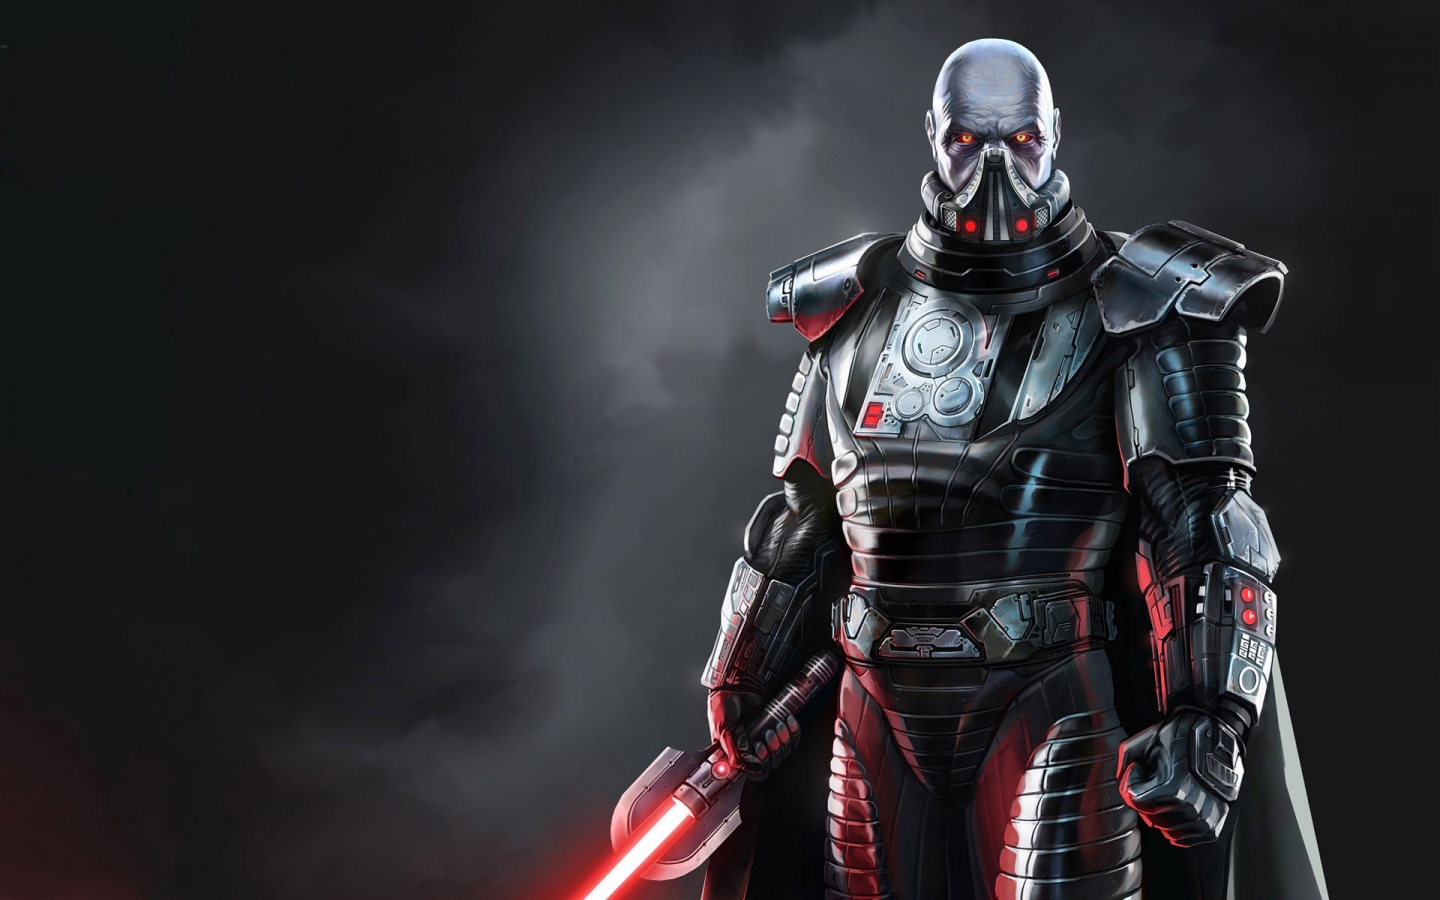 Star Wars 2 Character for 1440 x 900 widescreen resolution